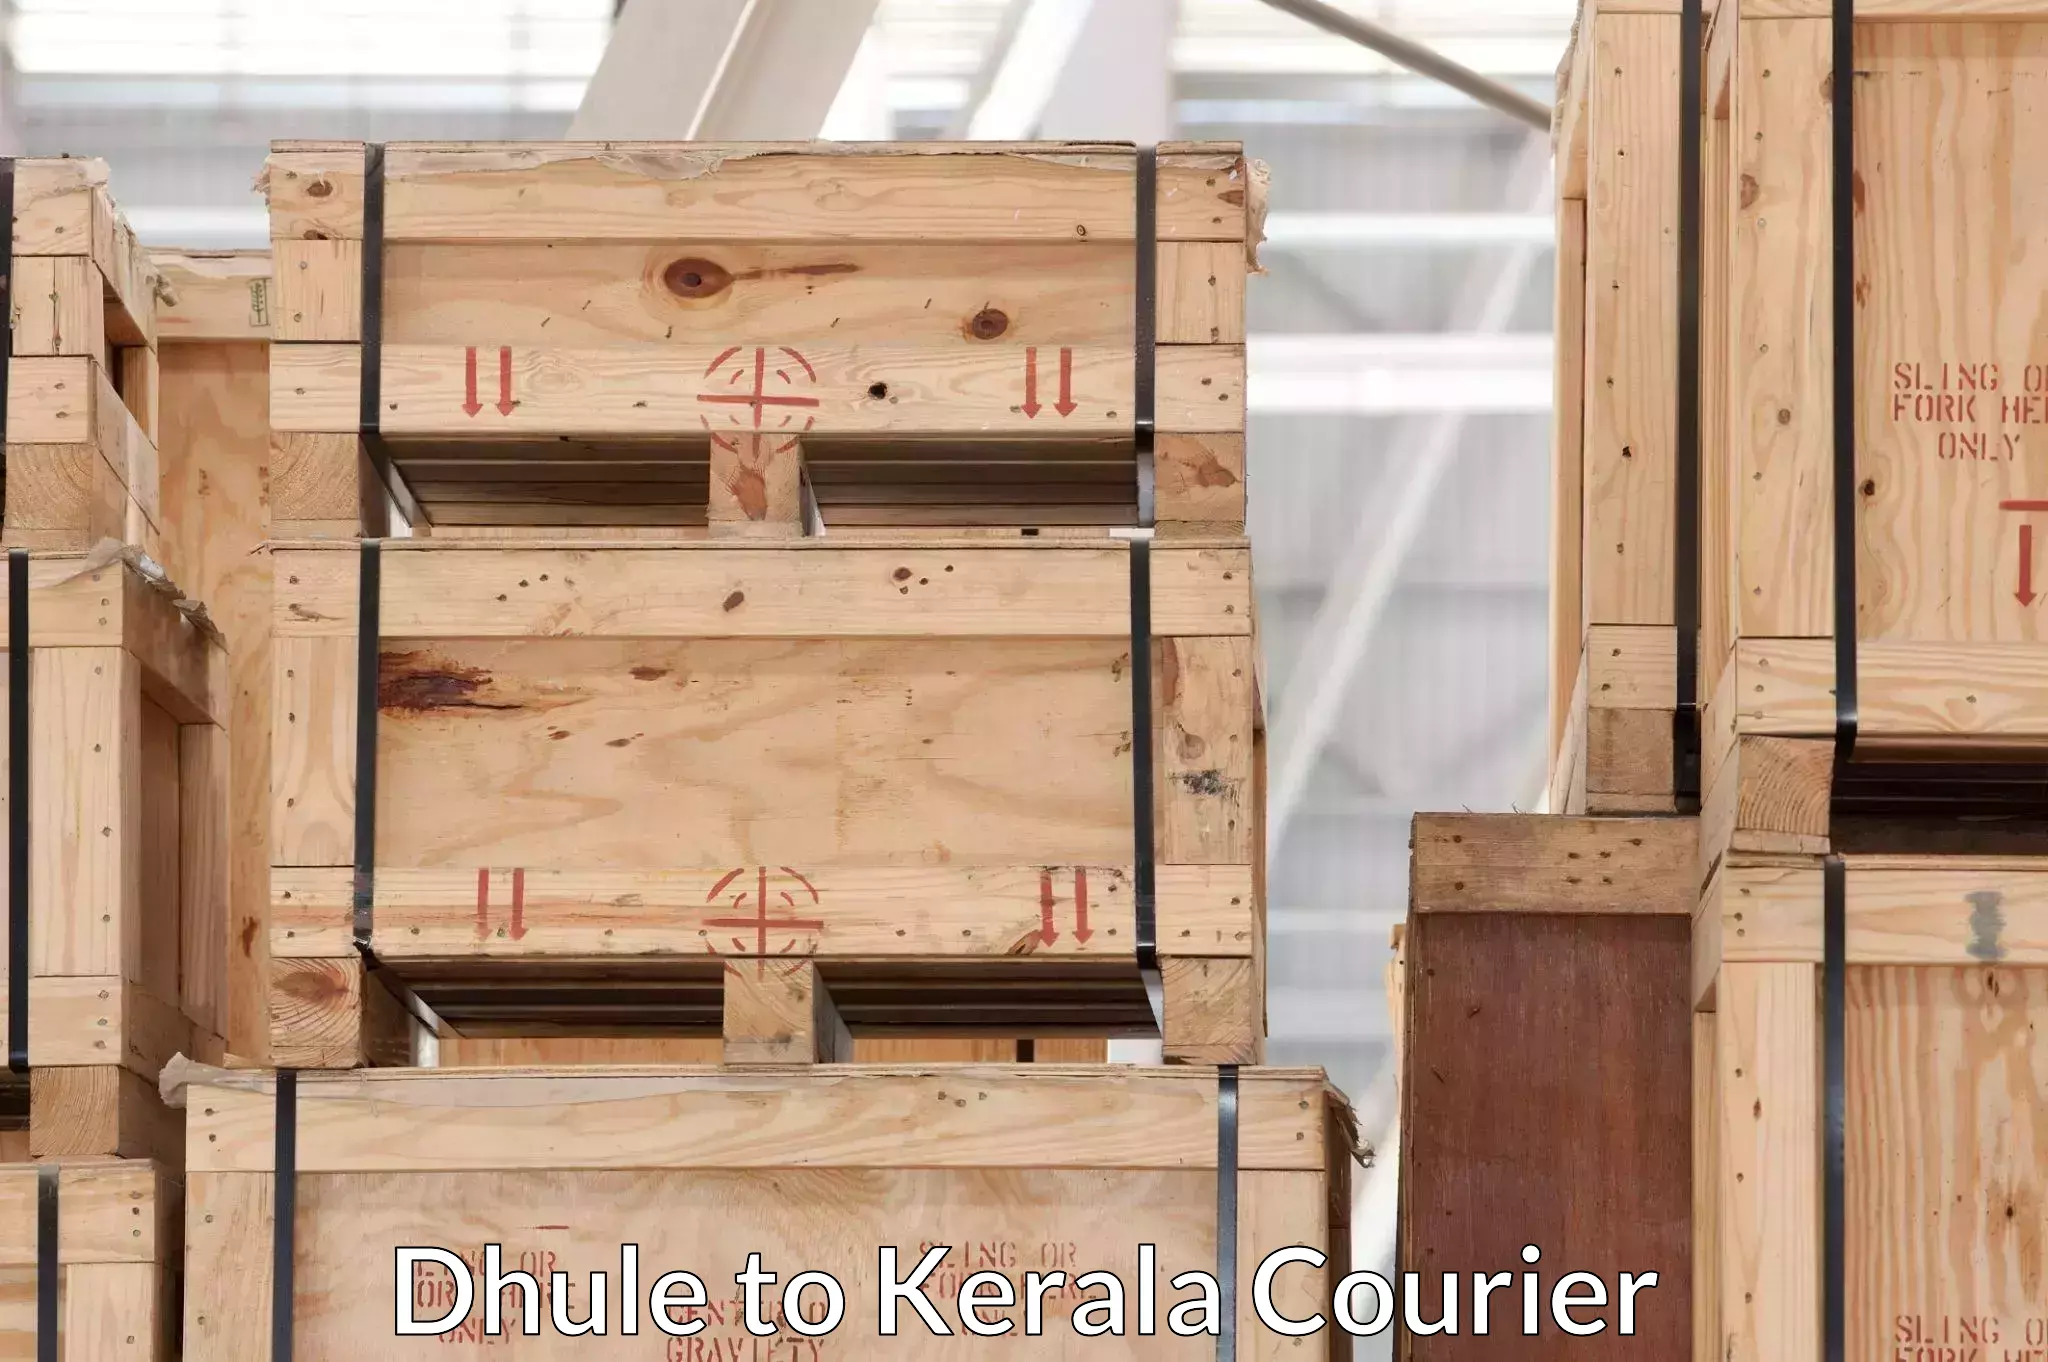 Furniture relocation services Dhule to Cochin University of Science and Technology